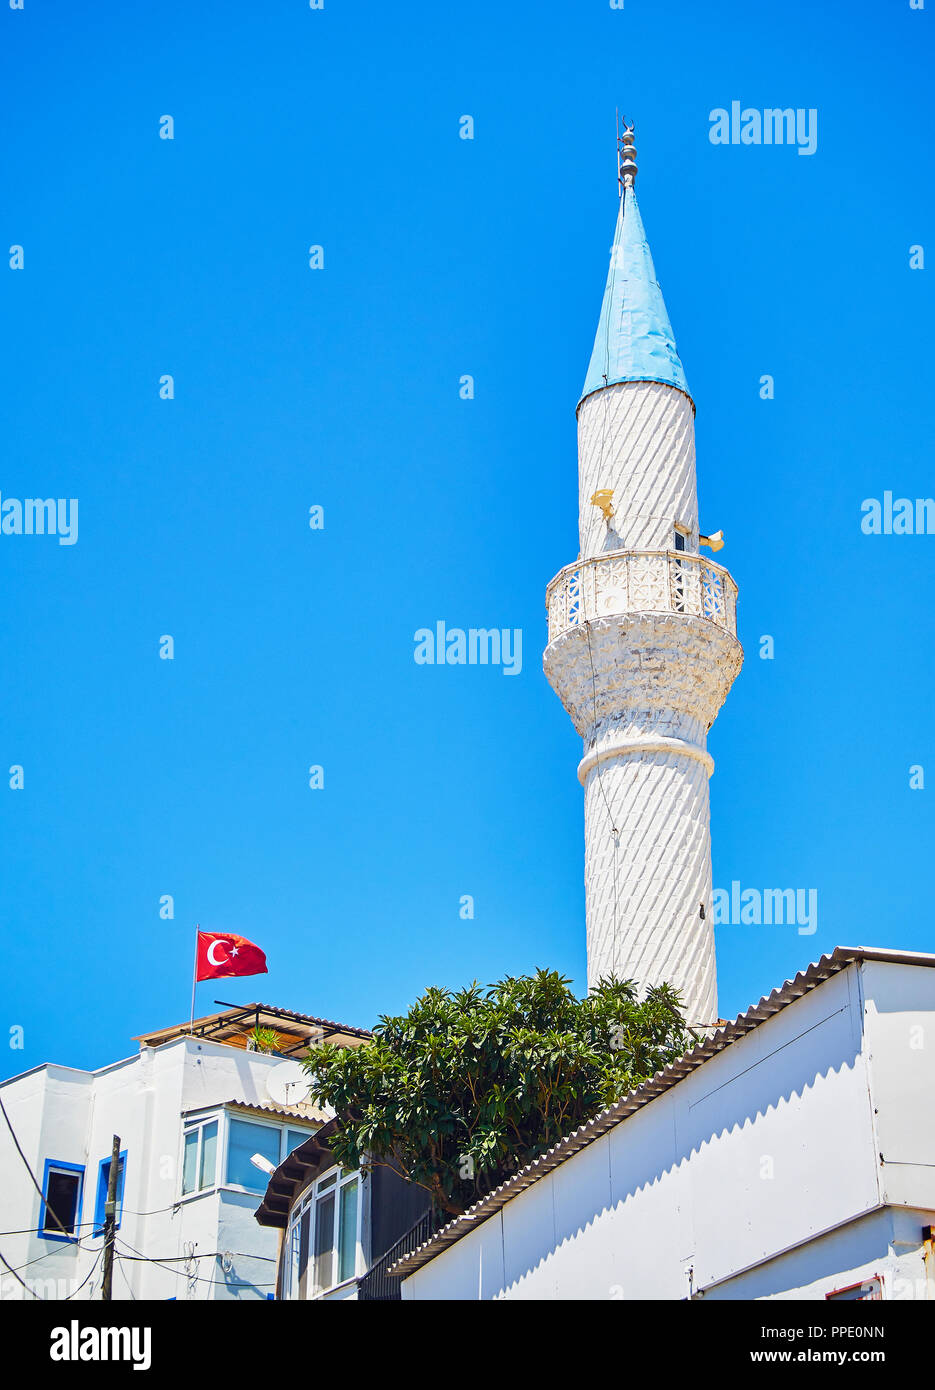 Minaret of Kelerlik Mahallesi Cami mosque with the official flag of the Republic of Turkey waving in the background. Stock Photo